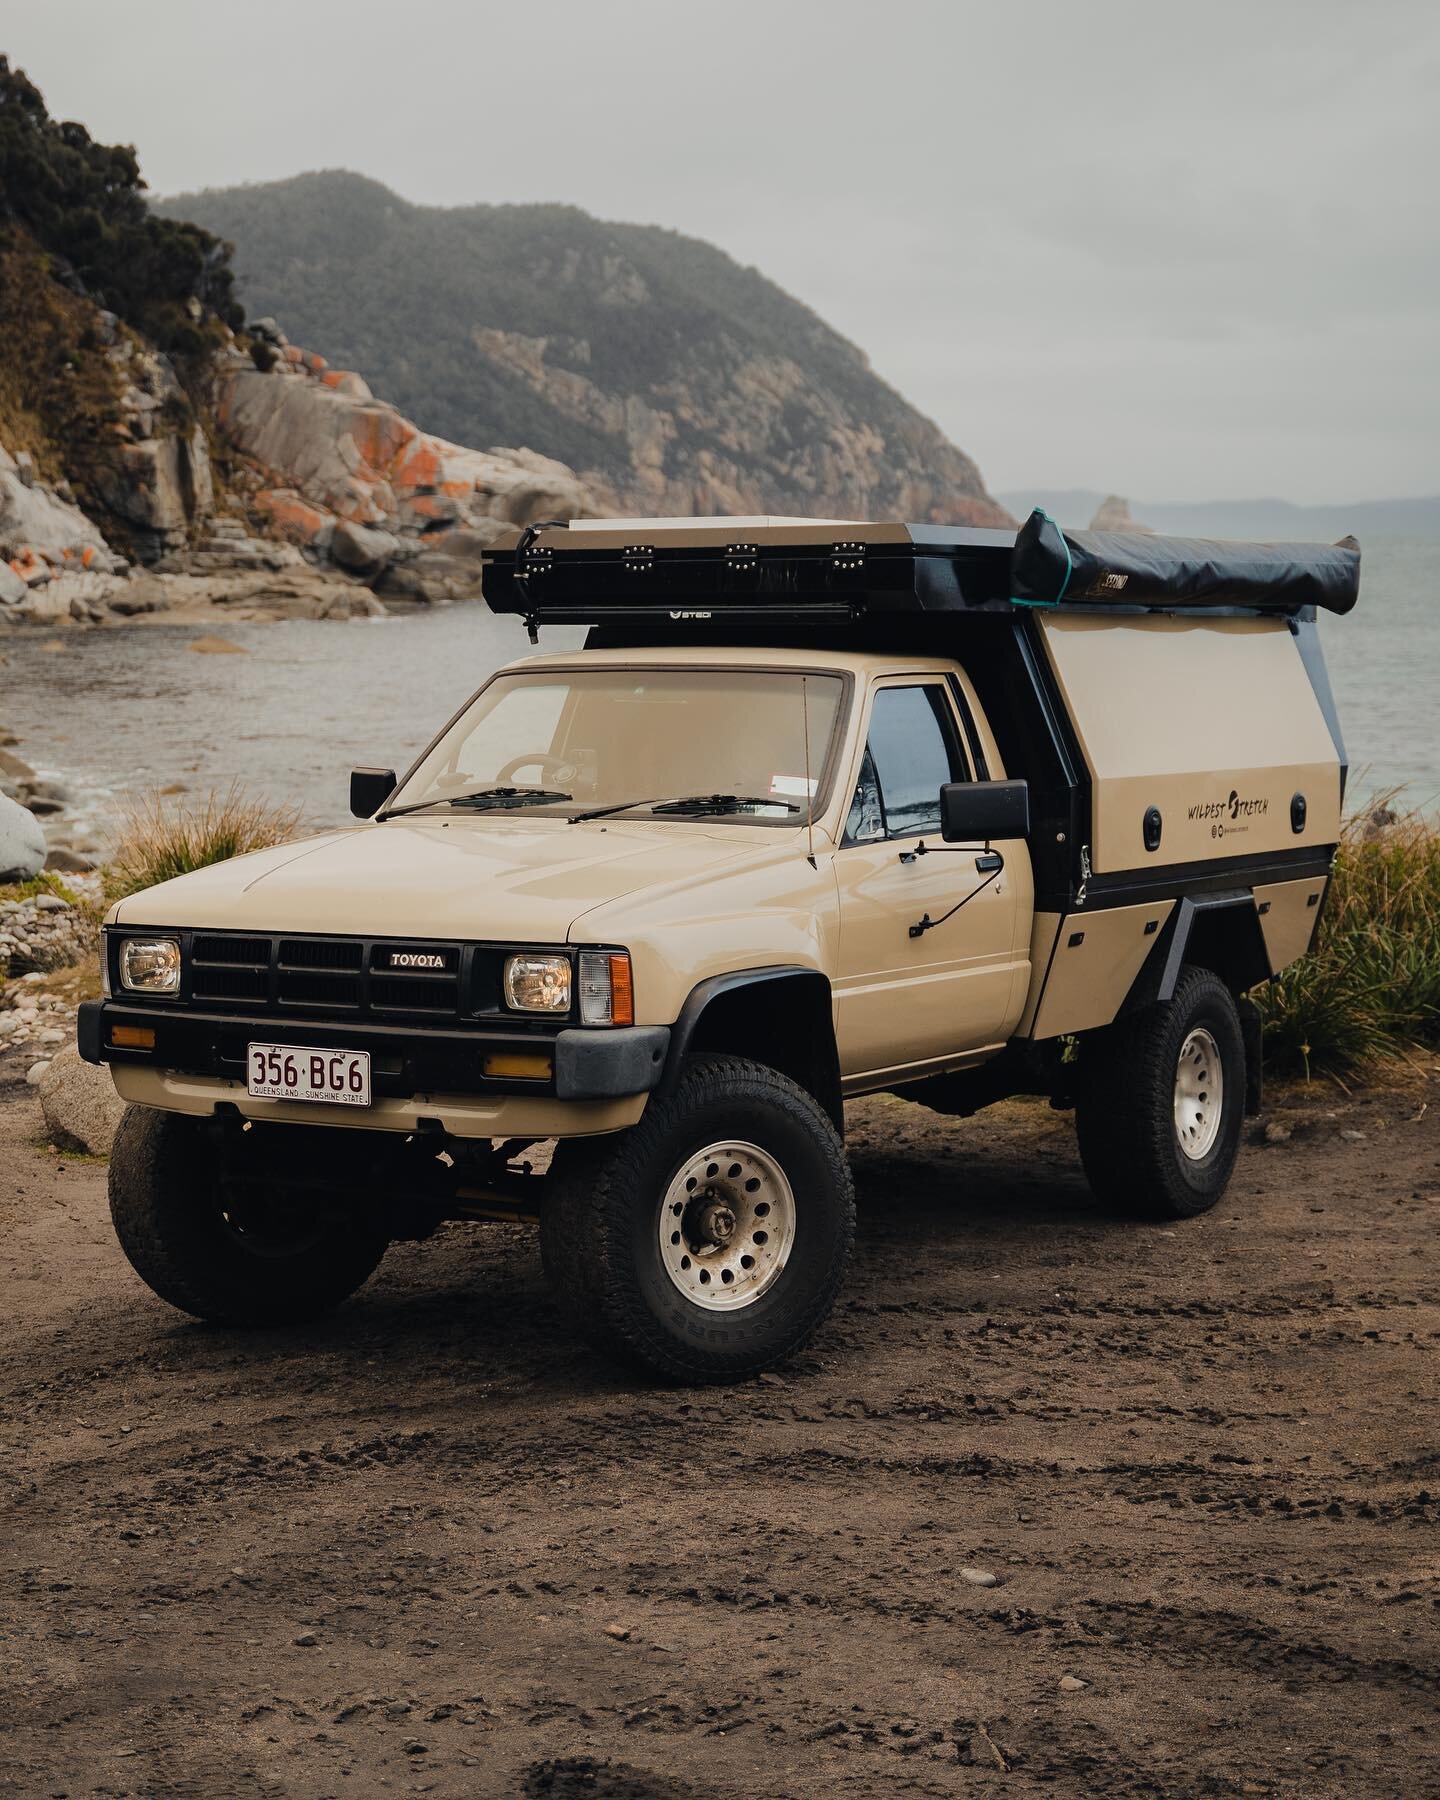 Sundays with Liam + Tara&rsquo;s 1986 NY67 Toyota Hilux, built for fulltime travel around Australia. Head over to the website to check it out. 📸 @wildest.stretch 

#toyota #toyotahilux4x4 #hilux #holden #4x4 #4wd #camping #aus #classiccars #sunday